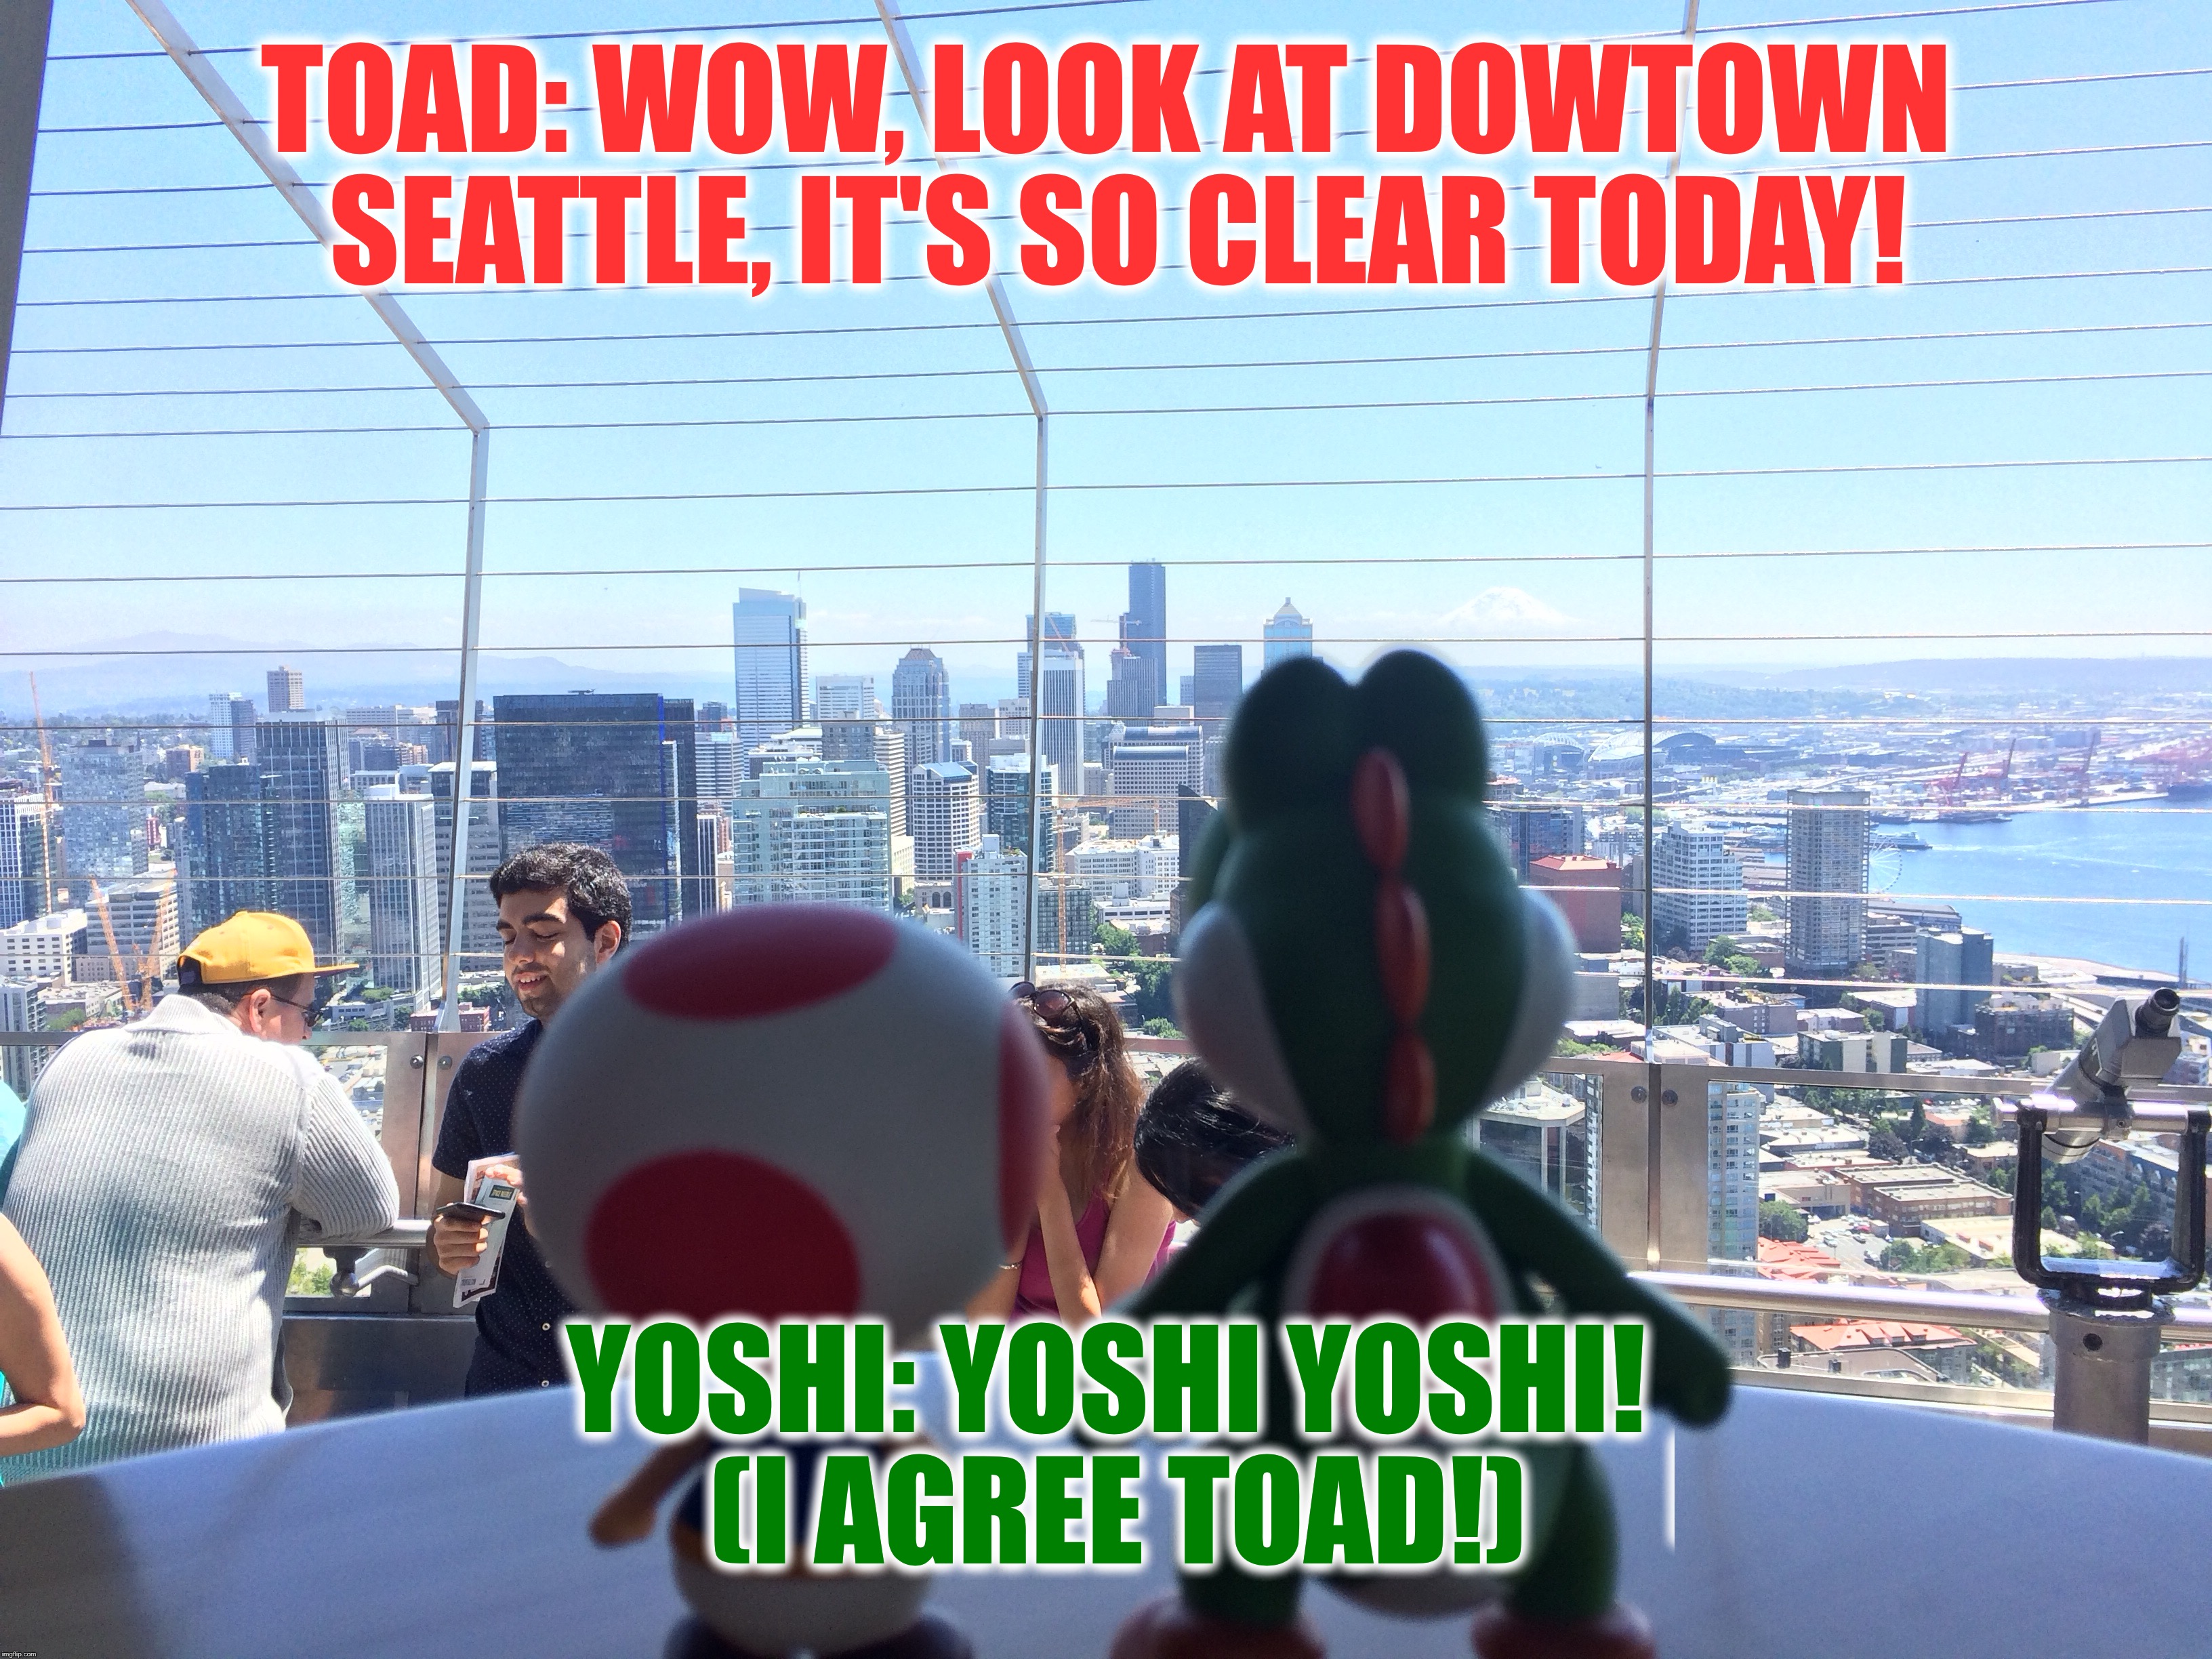 Toad & Yoshi Enjoy The View From The Space Needle | TOAD: WOW, LOOK AT DOWTOWN SEATTLE, IT'S SO CLEAR TODAY! YOSHI: YOSHI YOSHI! (I AGREE TOAD!) | image tagged in memes,funny,seattle,toad,yoshi,space needle | made w/ Imgflip meme maker